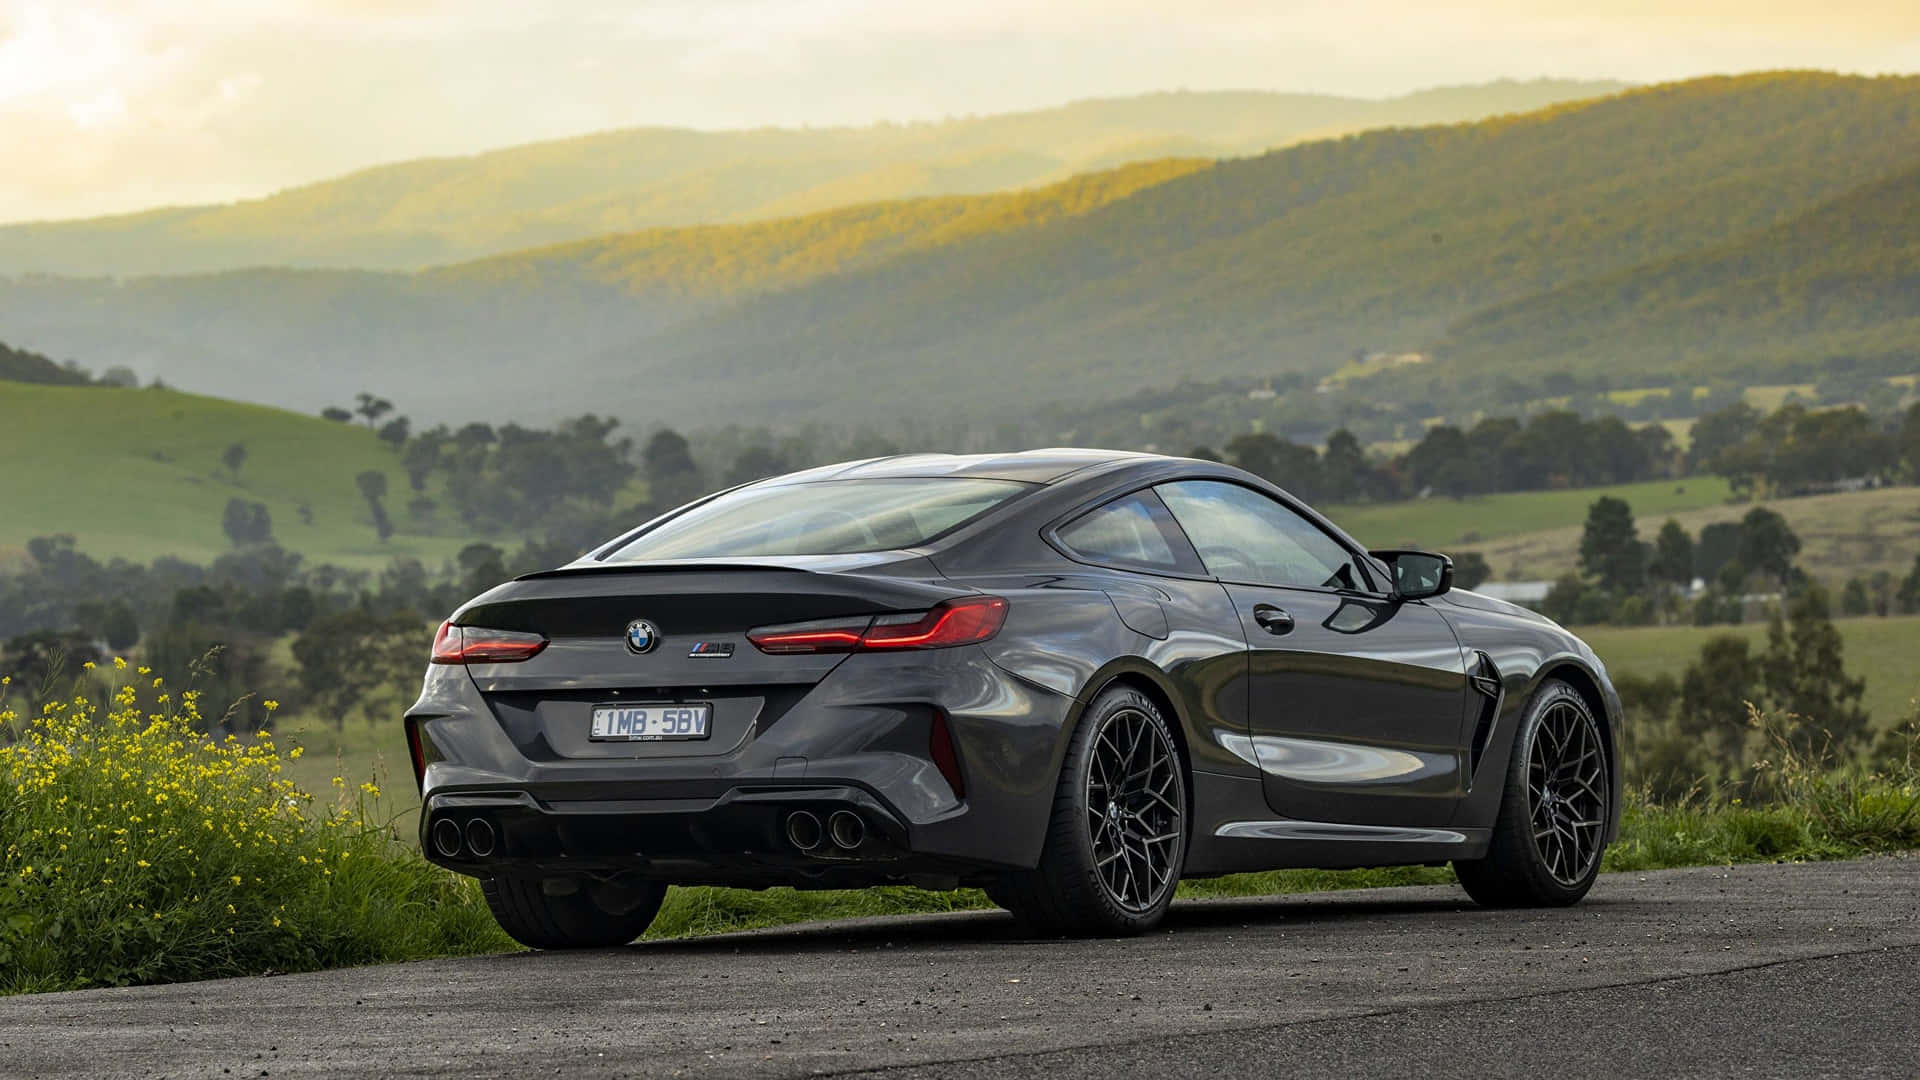 "The BMW M8: Power and Sophistication Combined" Wallpaper